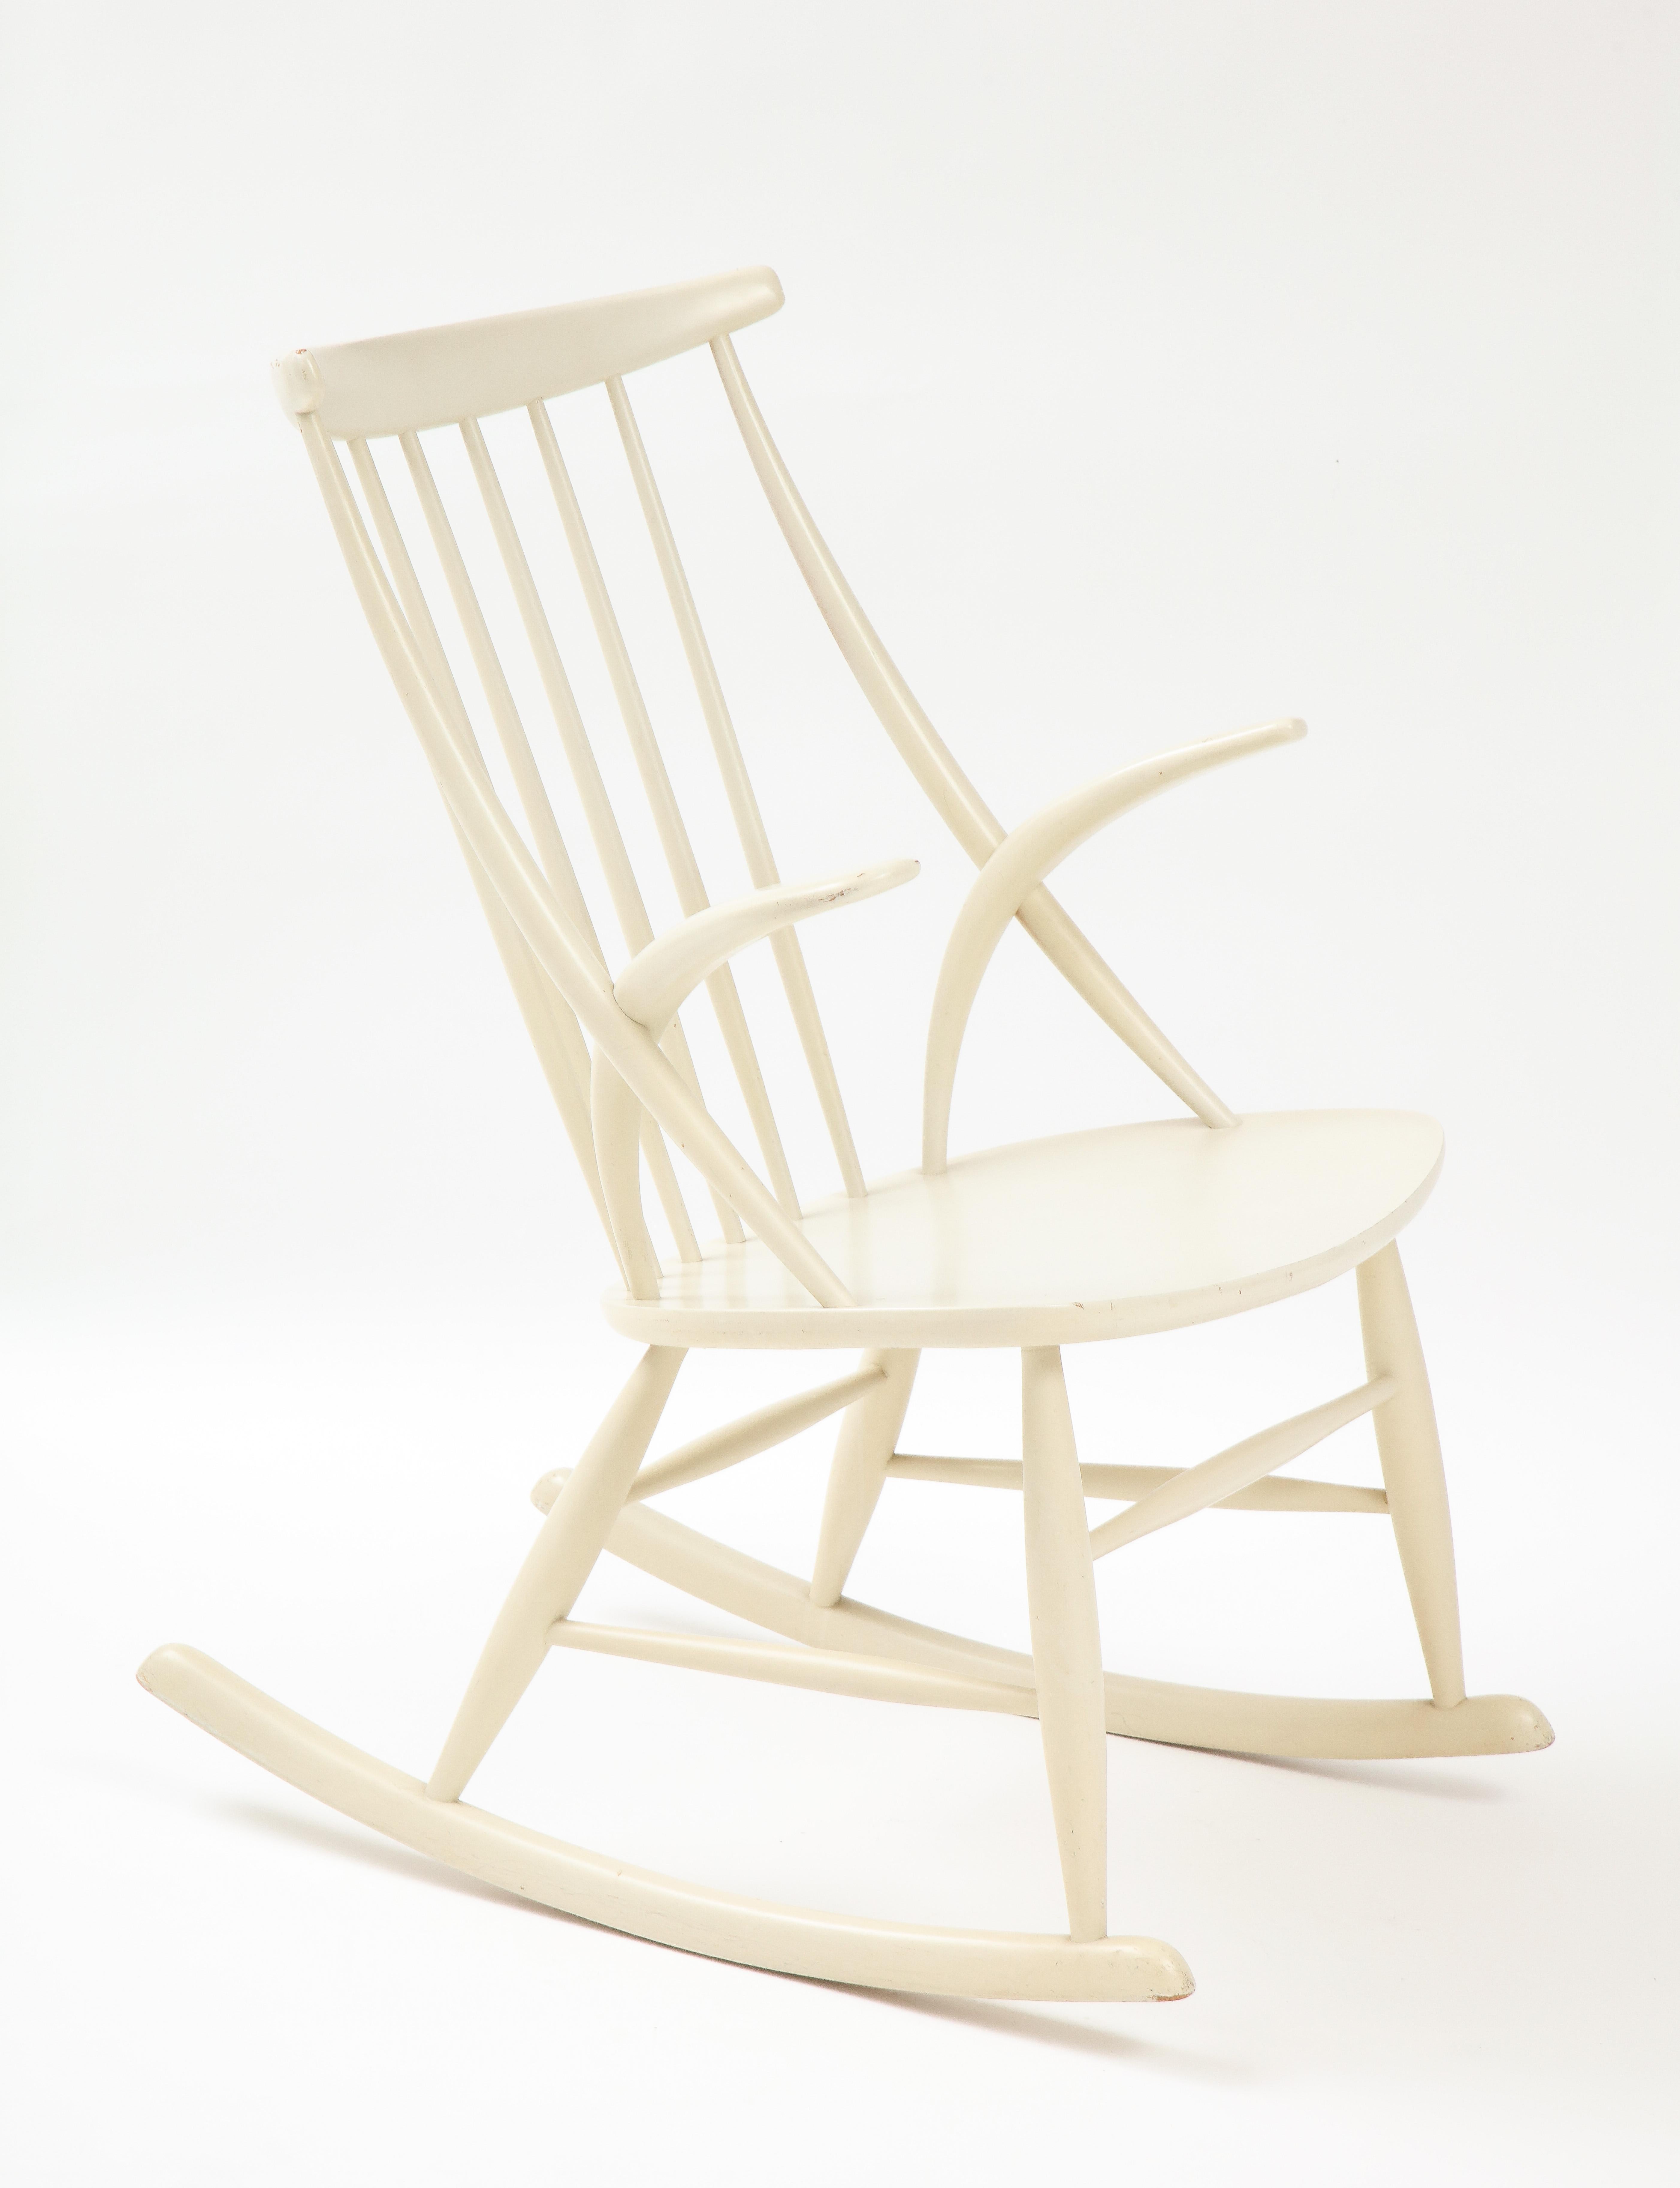 Iconic Danish Rocking chair - everyones parents and grandparents had one or wanted one in Denmark - this rocking chair is a modern classic. Danish design and craftsmanship, and always look good. Not too big, and not too small - easy to use and move.